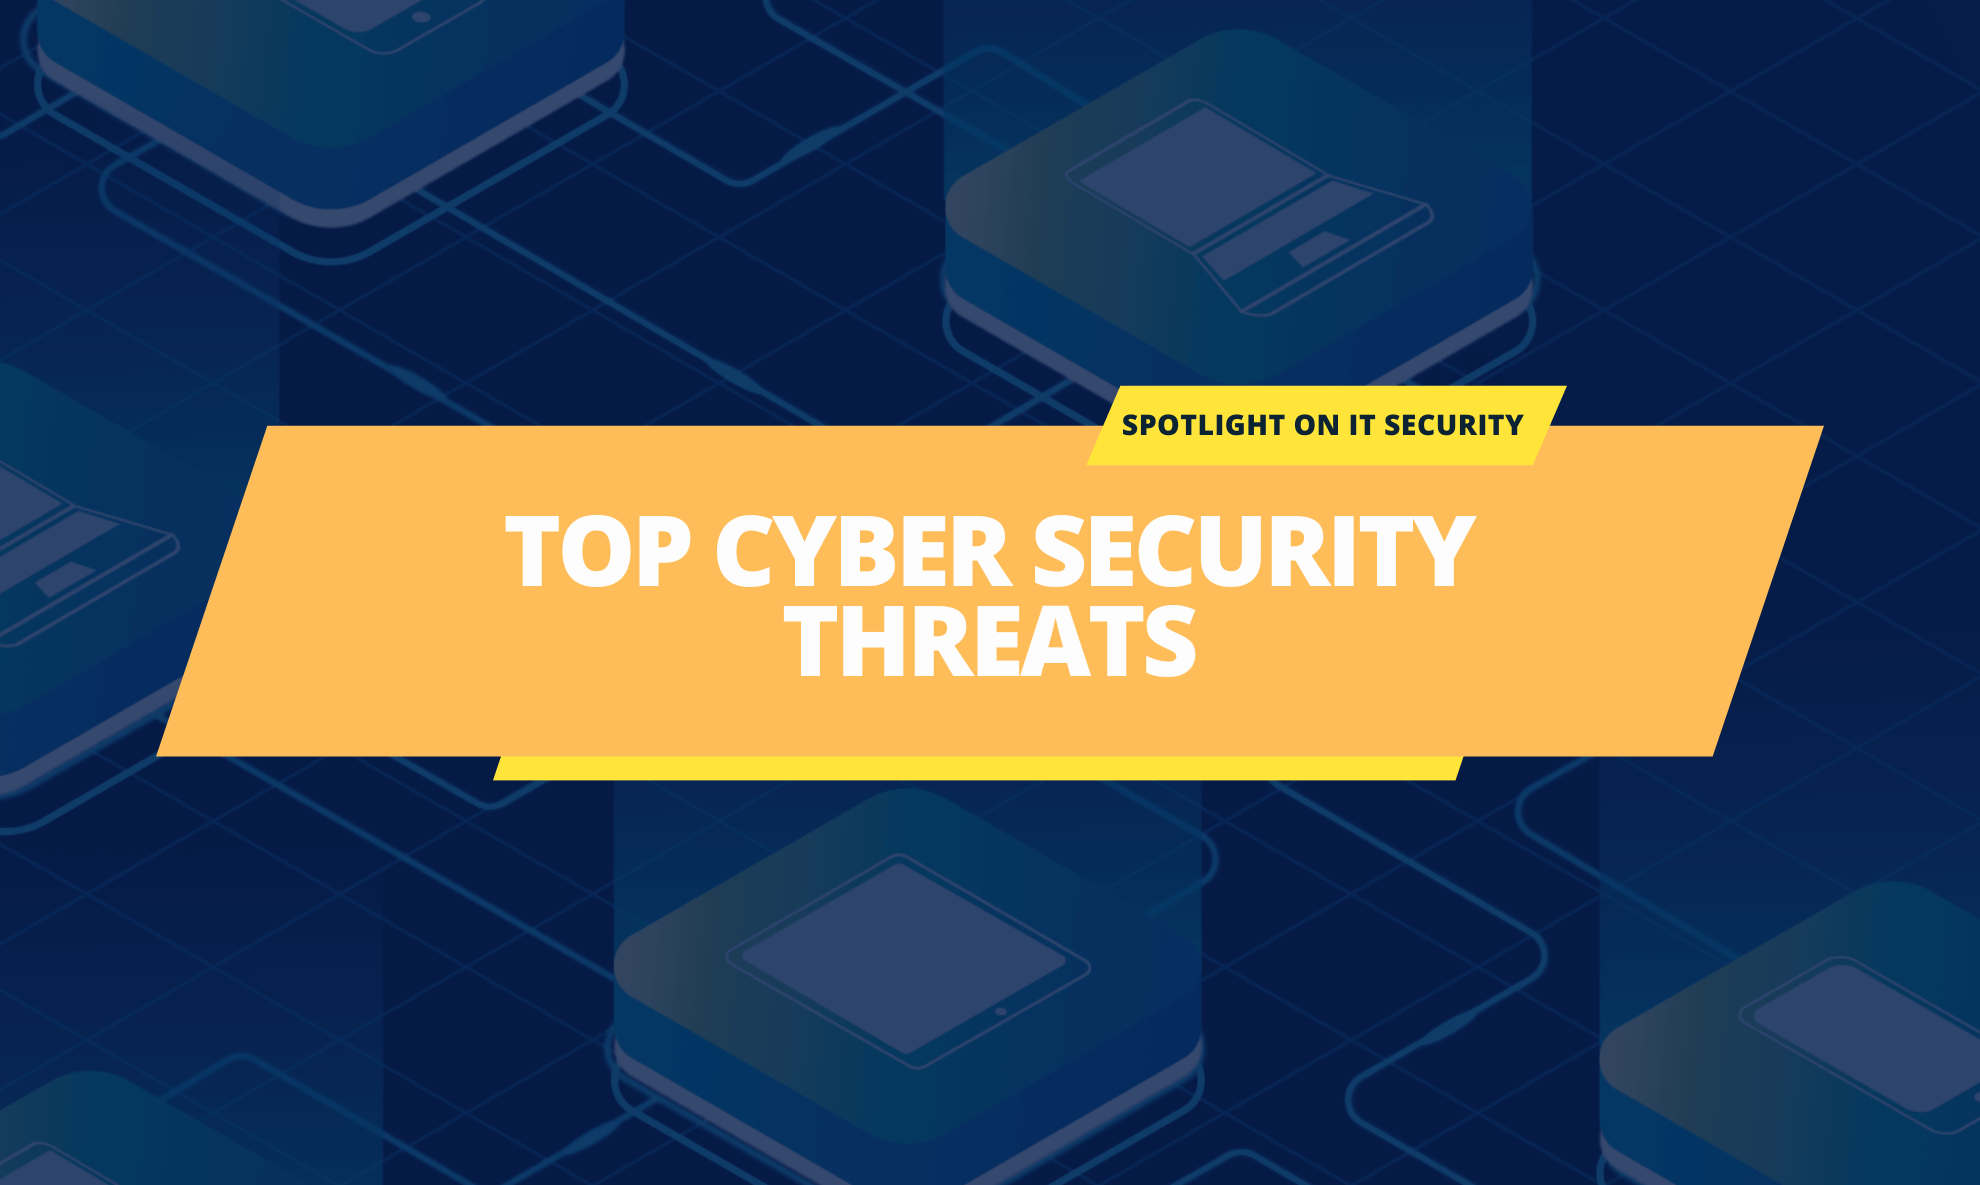 The Top Cyber Security Threats and Vulnerabilities in the IT Space